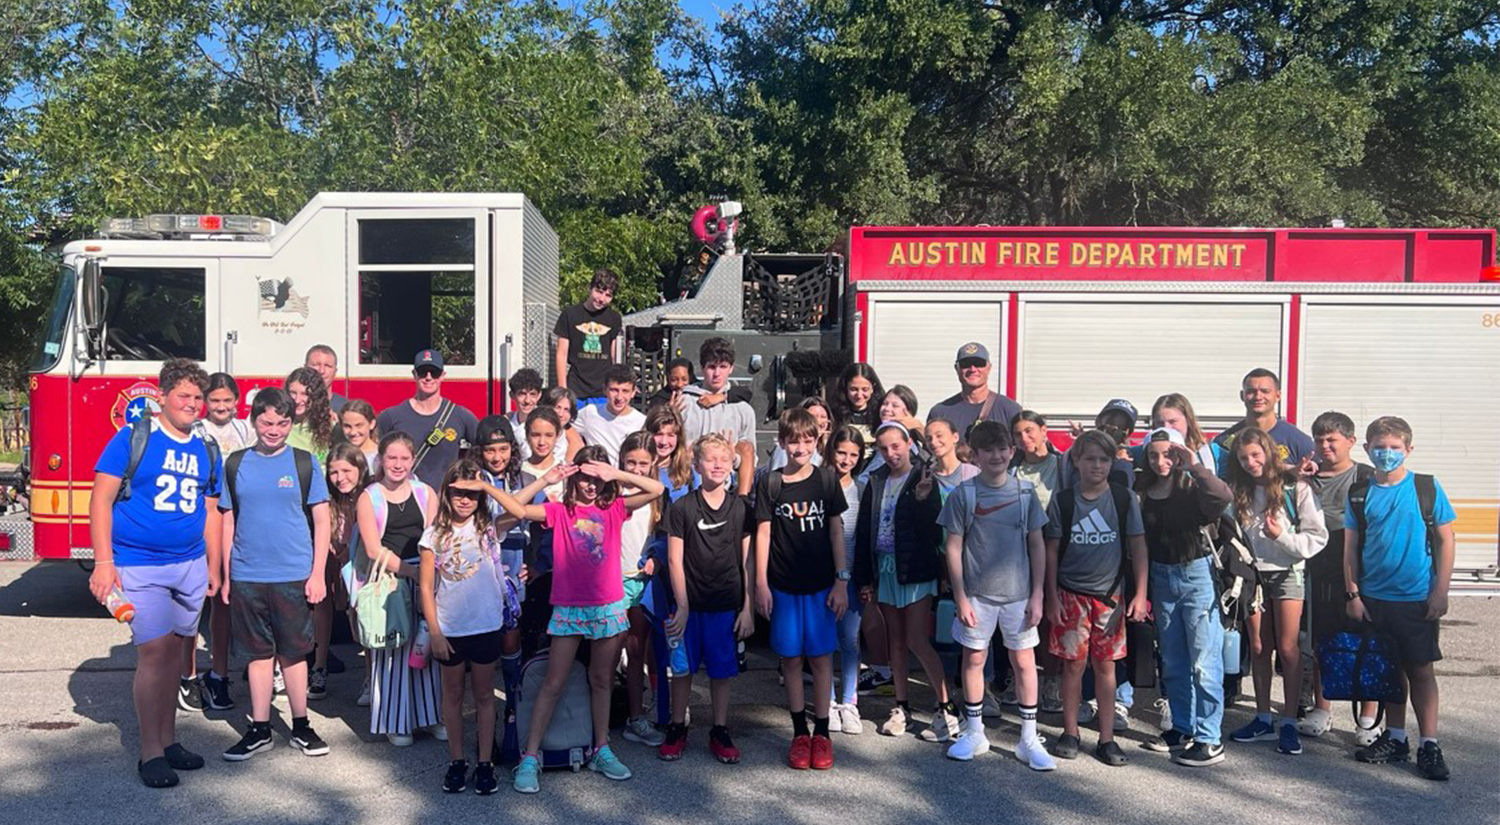 Students in Austin Honor Local First Responders on Anniversary of 9/11